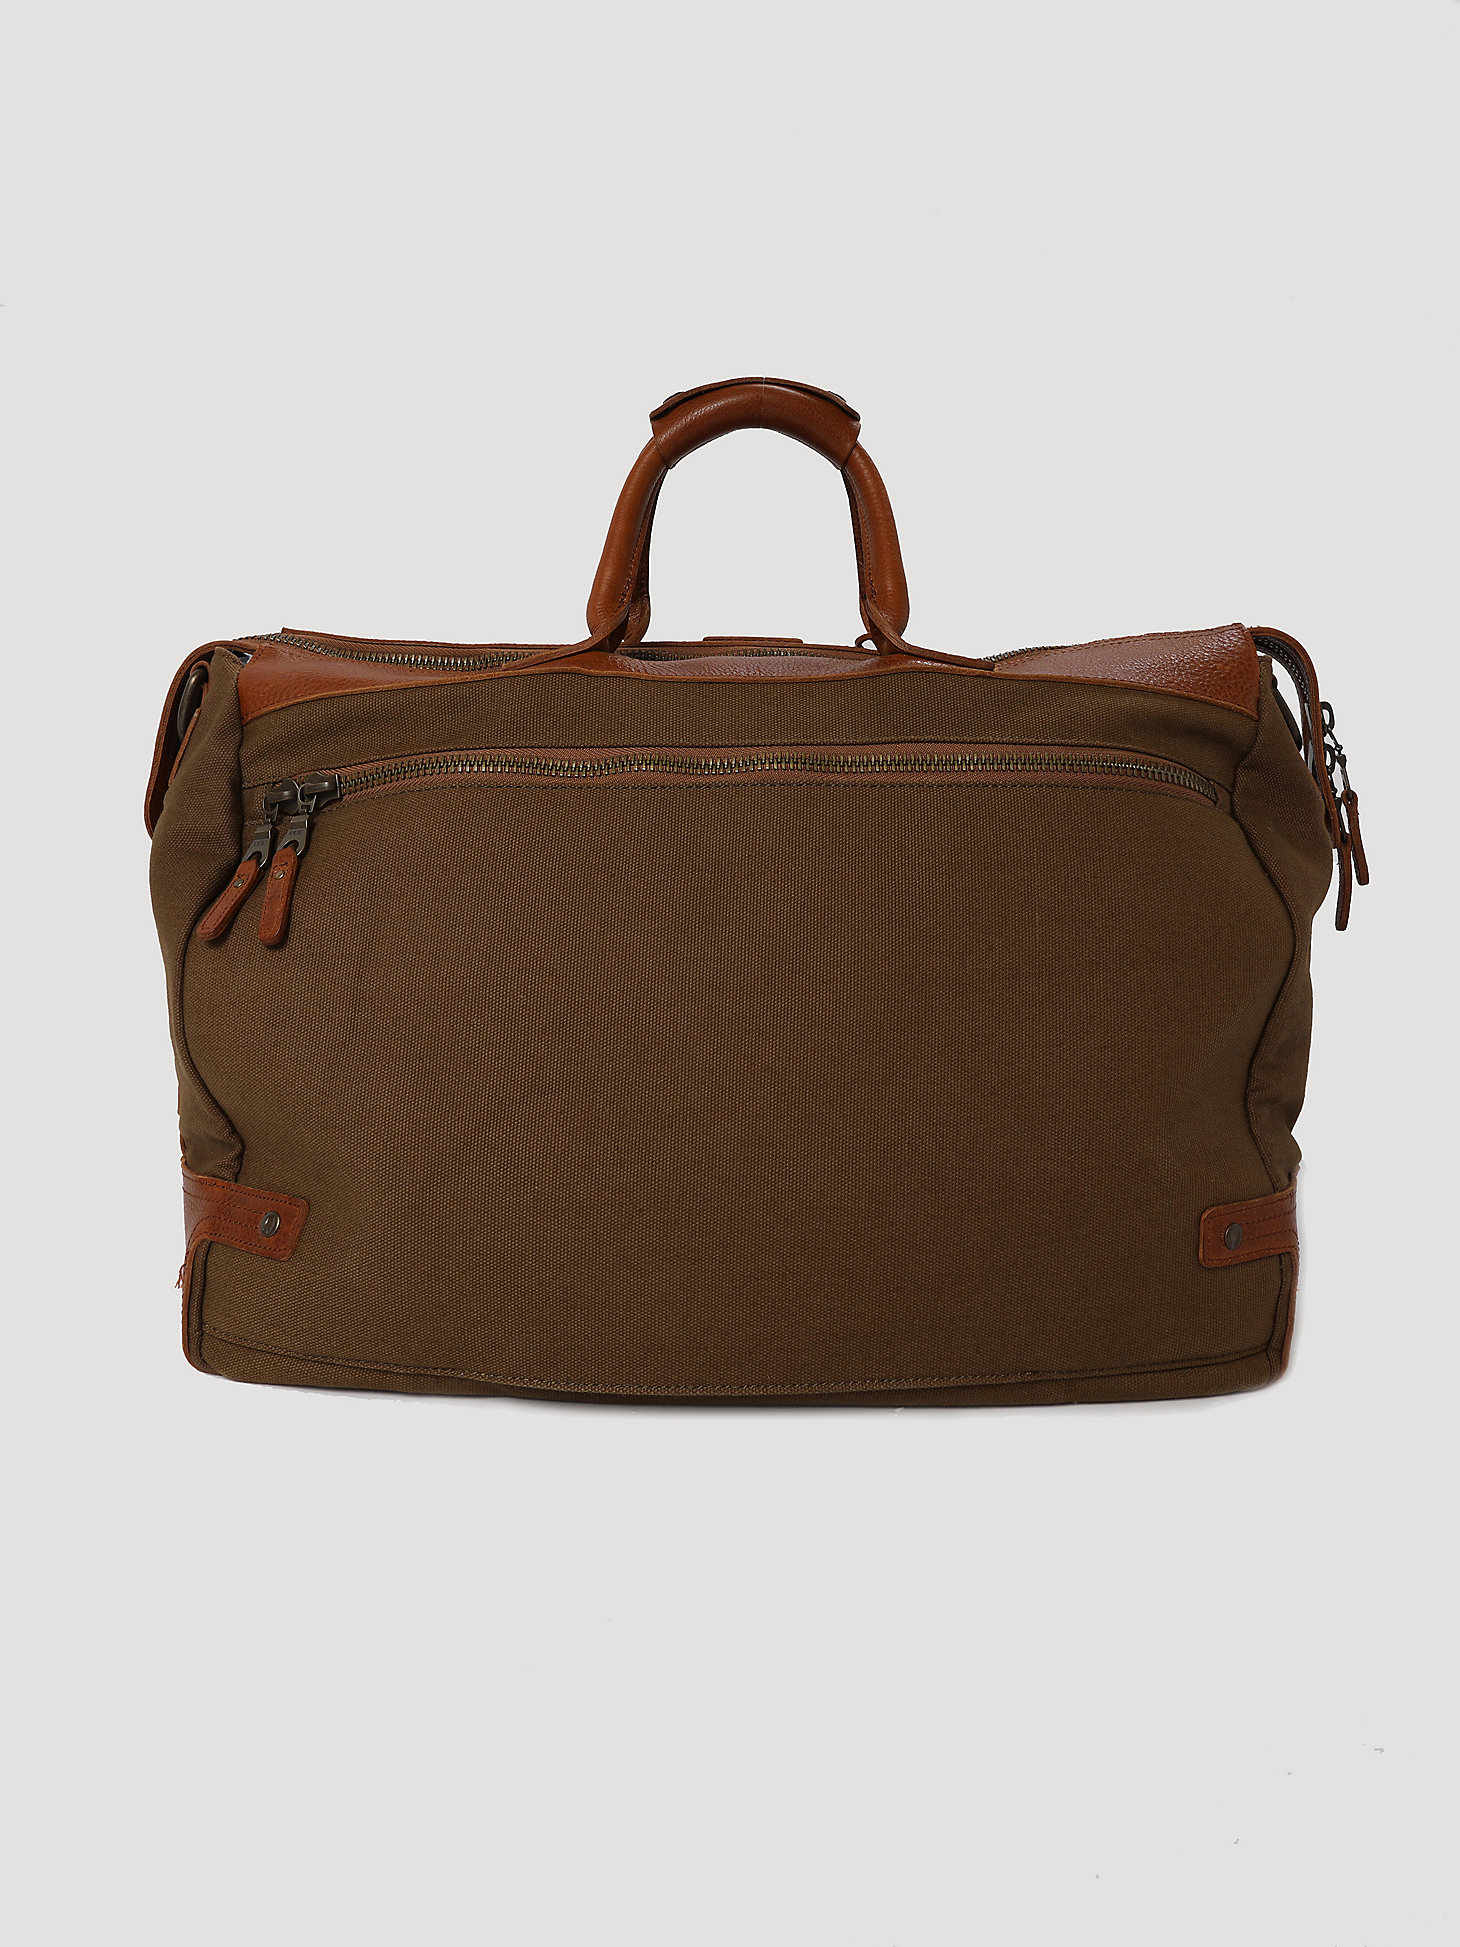 Wrangler X Will Leather Goods 75th Anniversary Cargo Pocket Traveler Bag in Brown alternative view 6